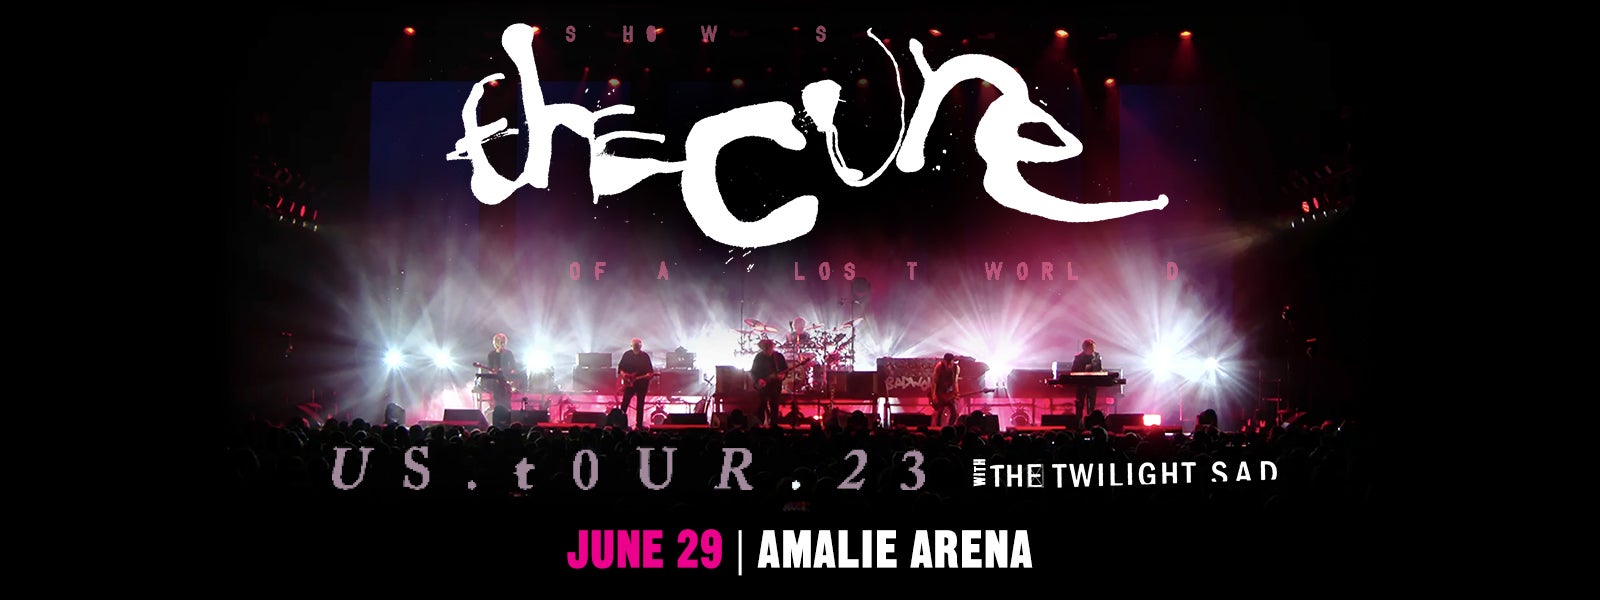 TheCure_1600x600.jpg